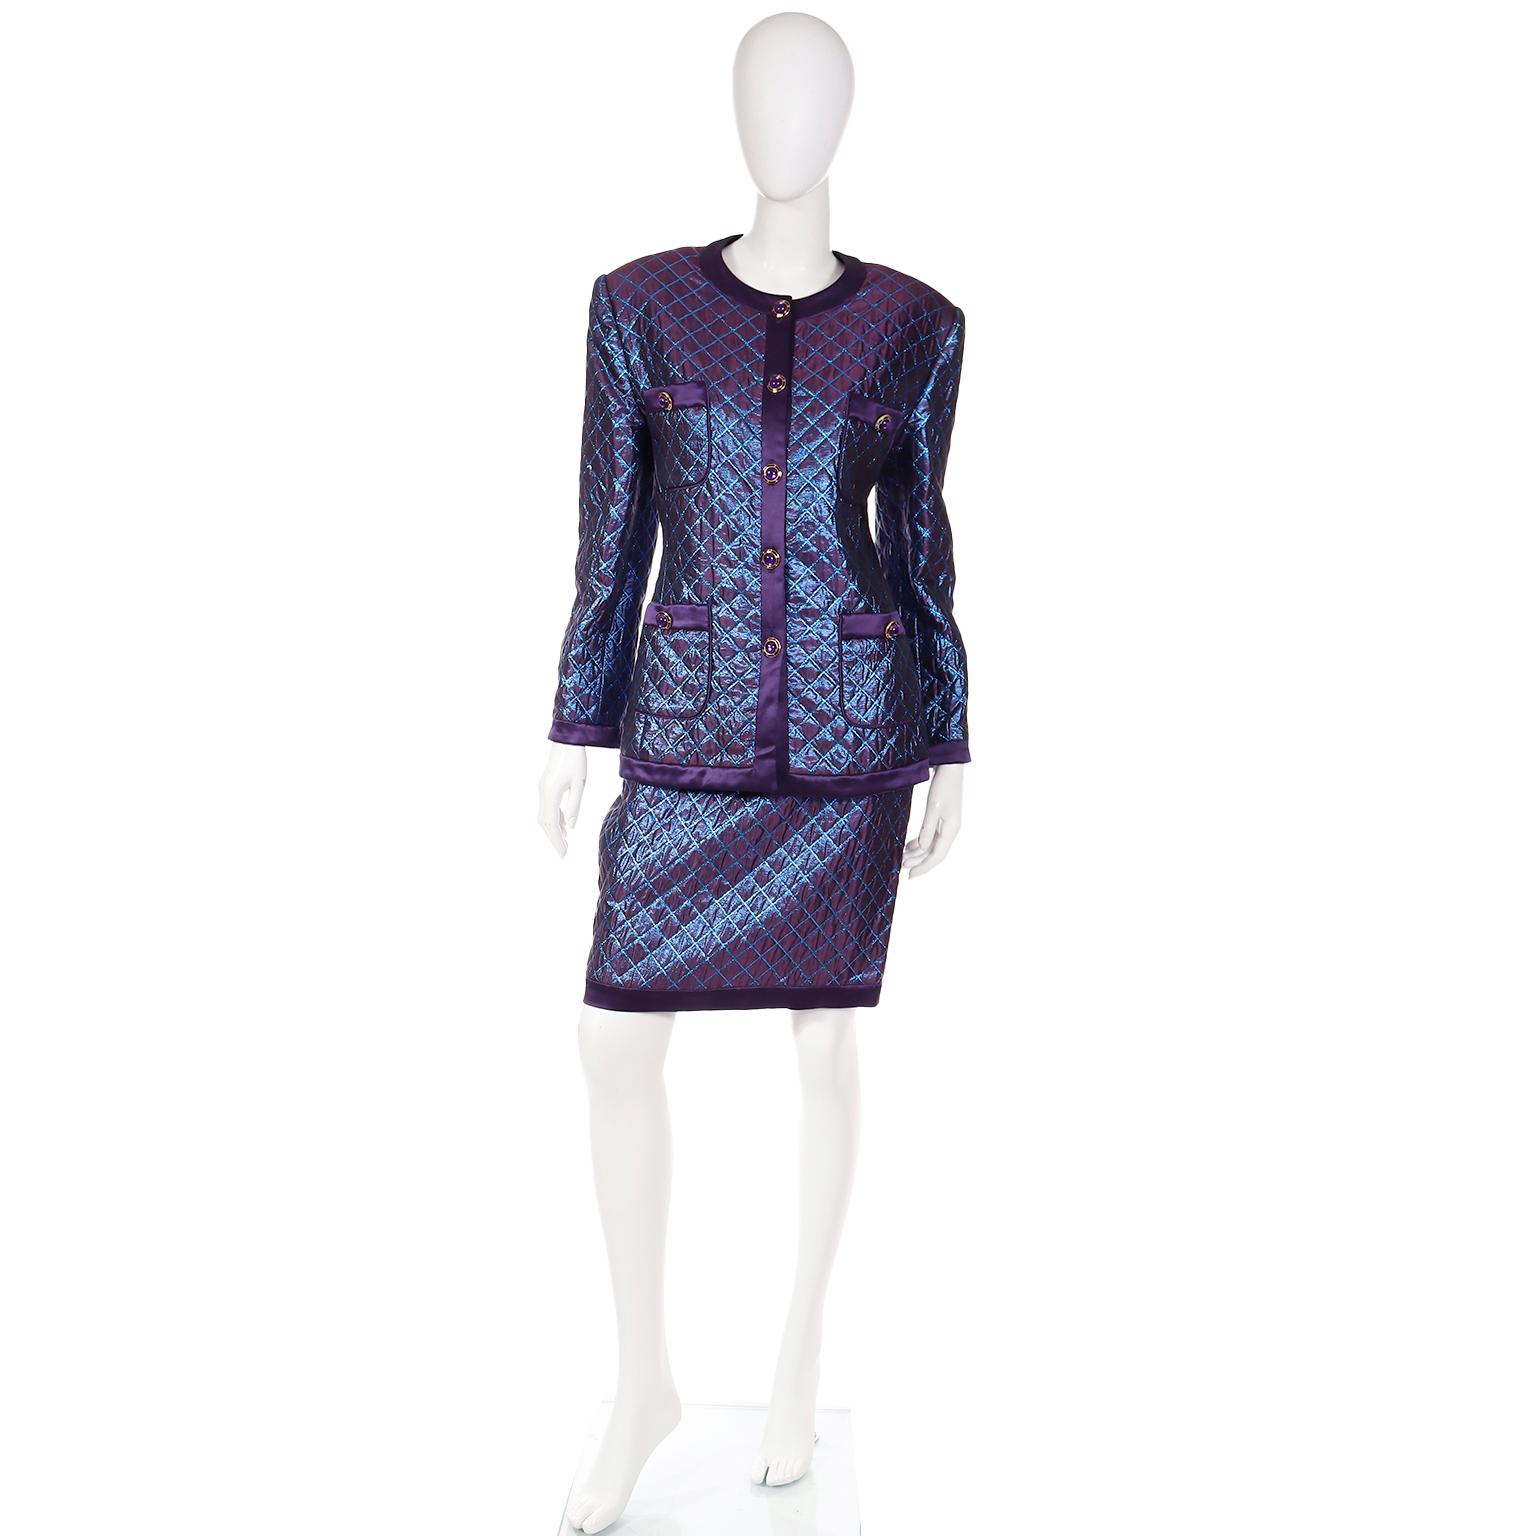 This is an outstanding Escada Margaretha Ley 1980's purple metallic 2 piece evening suit that includes a long jacket and a slim skirt. The purple quilted fabric has blue metallic thread that defines the diamond check pattern in the outfit. The